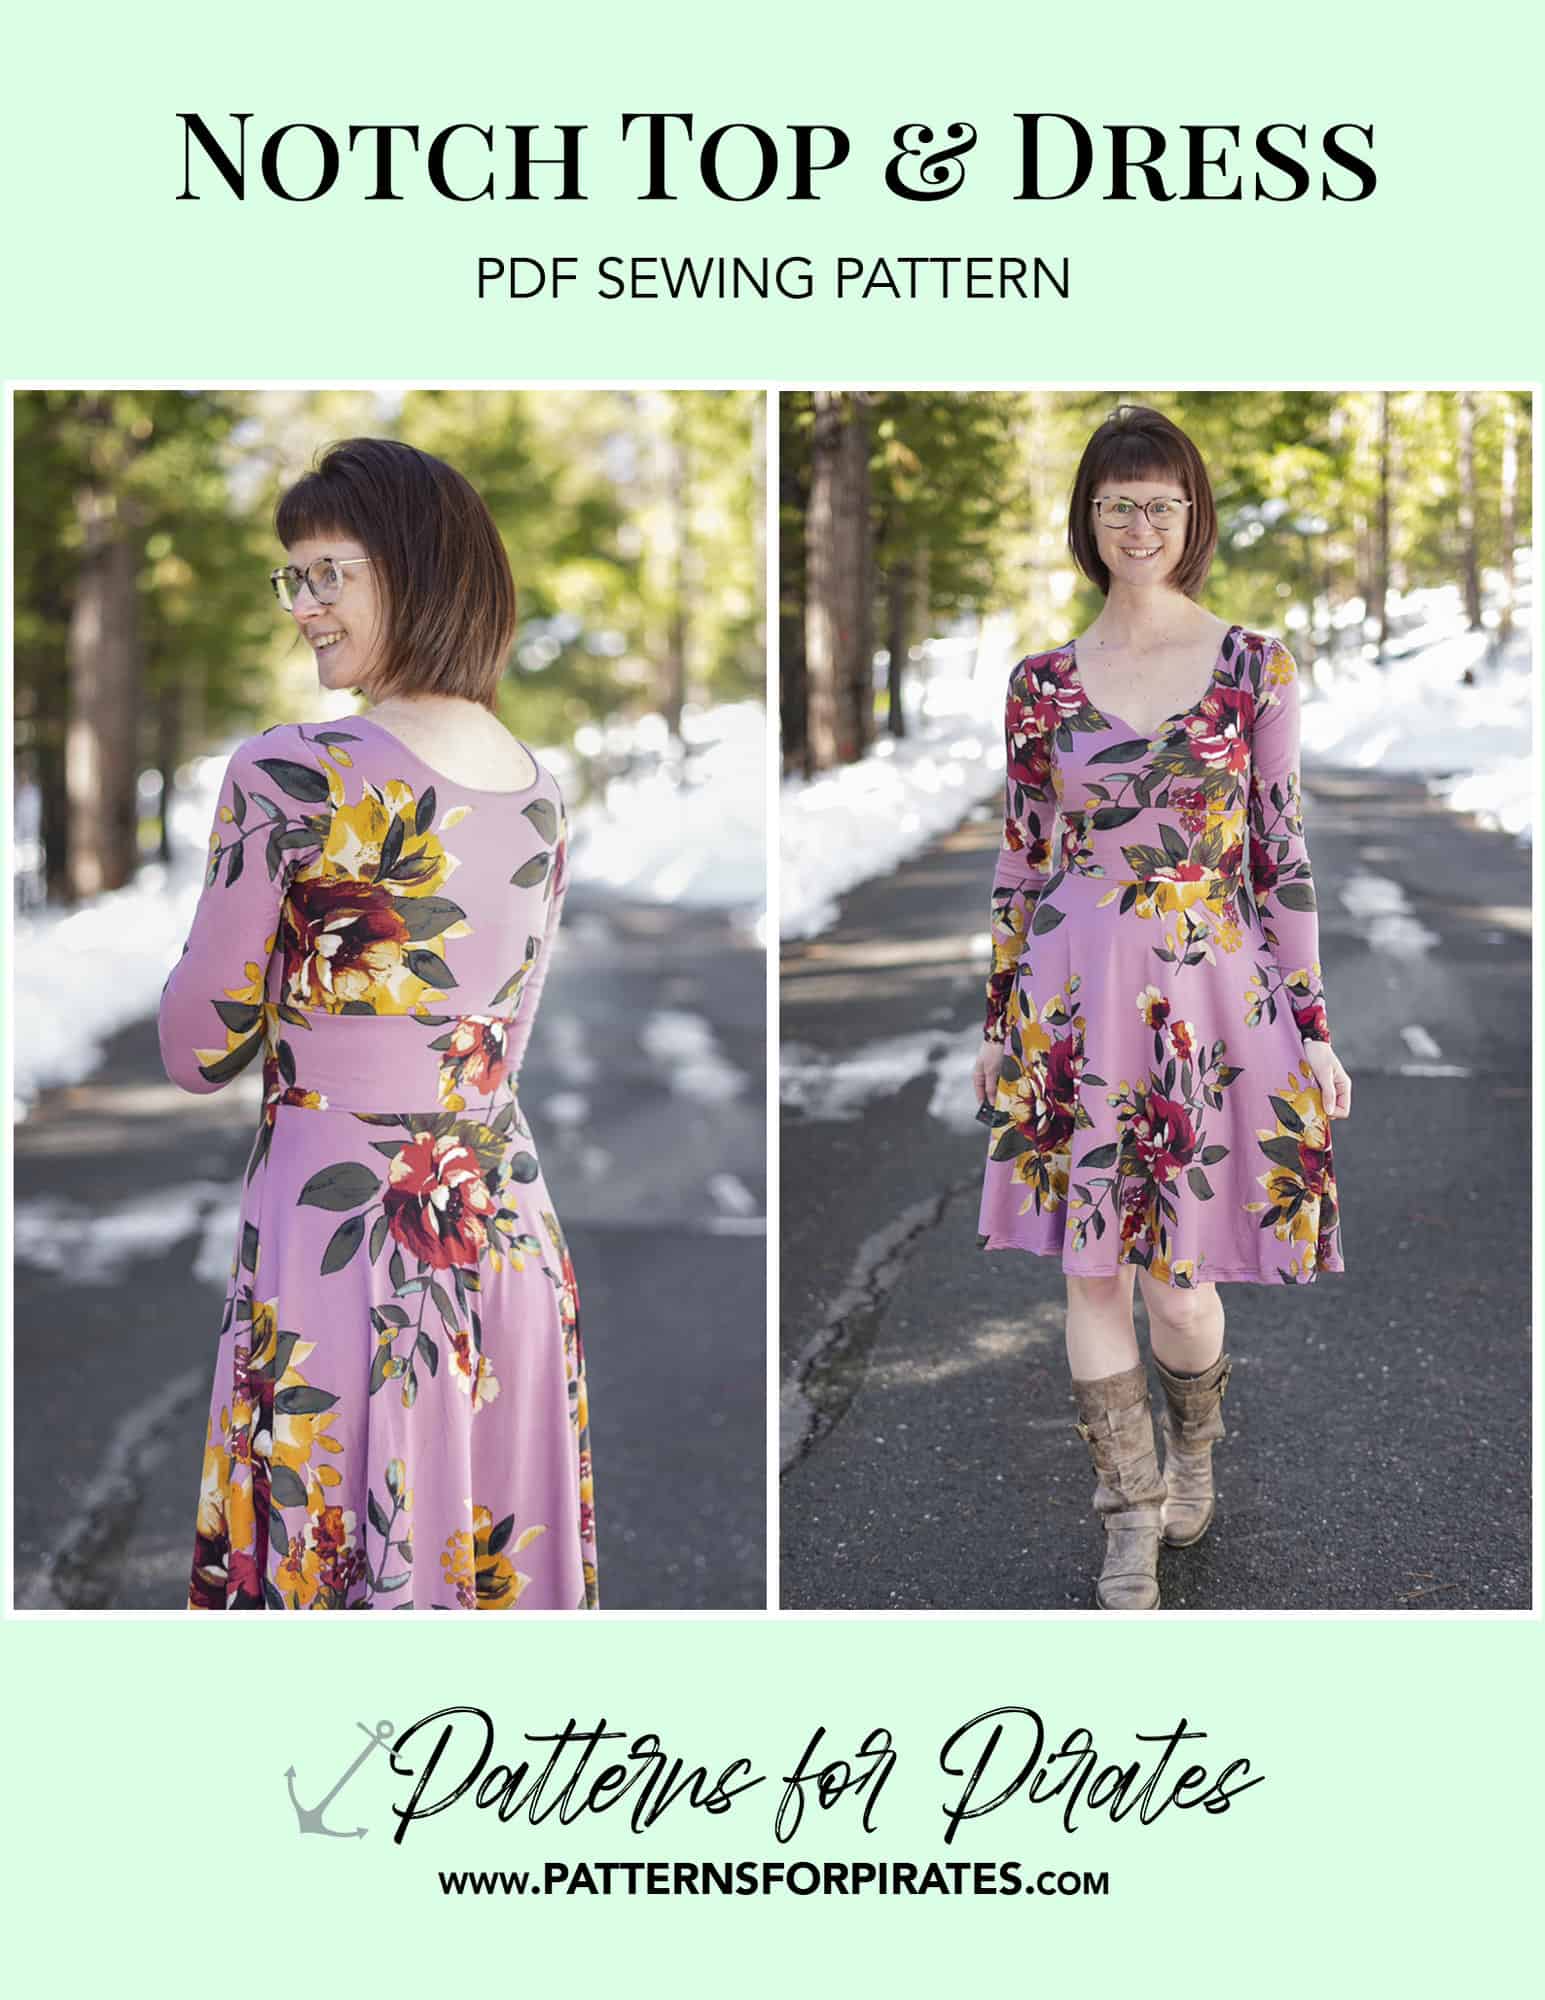 Notch Top & Dress - Patterns for Pirates